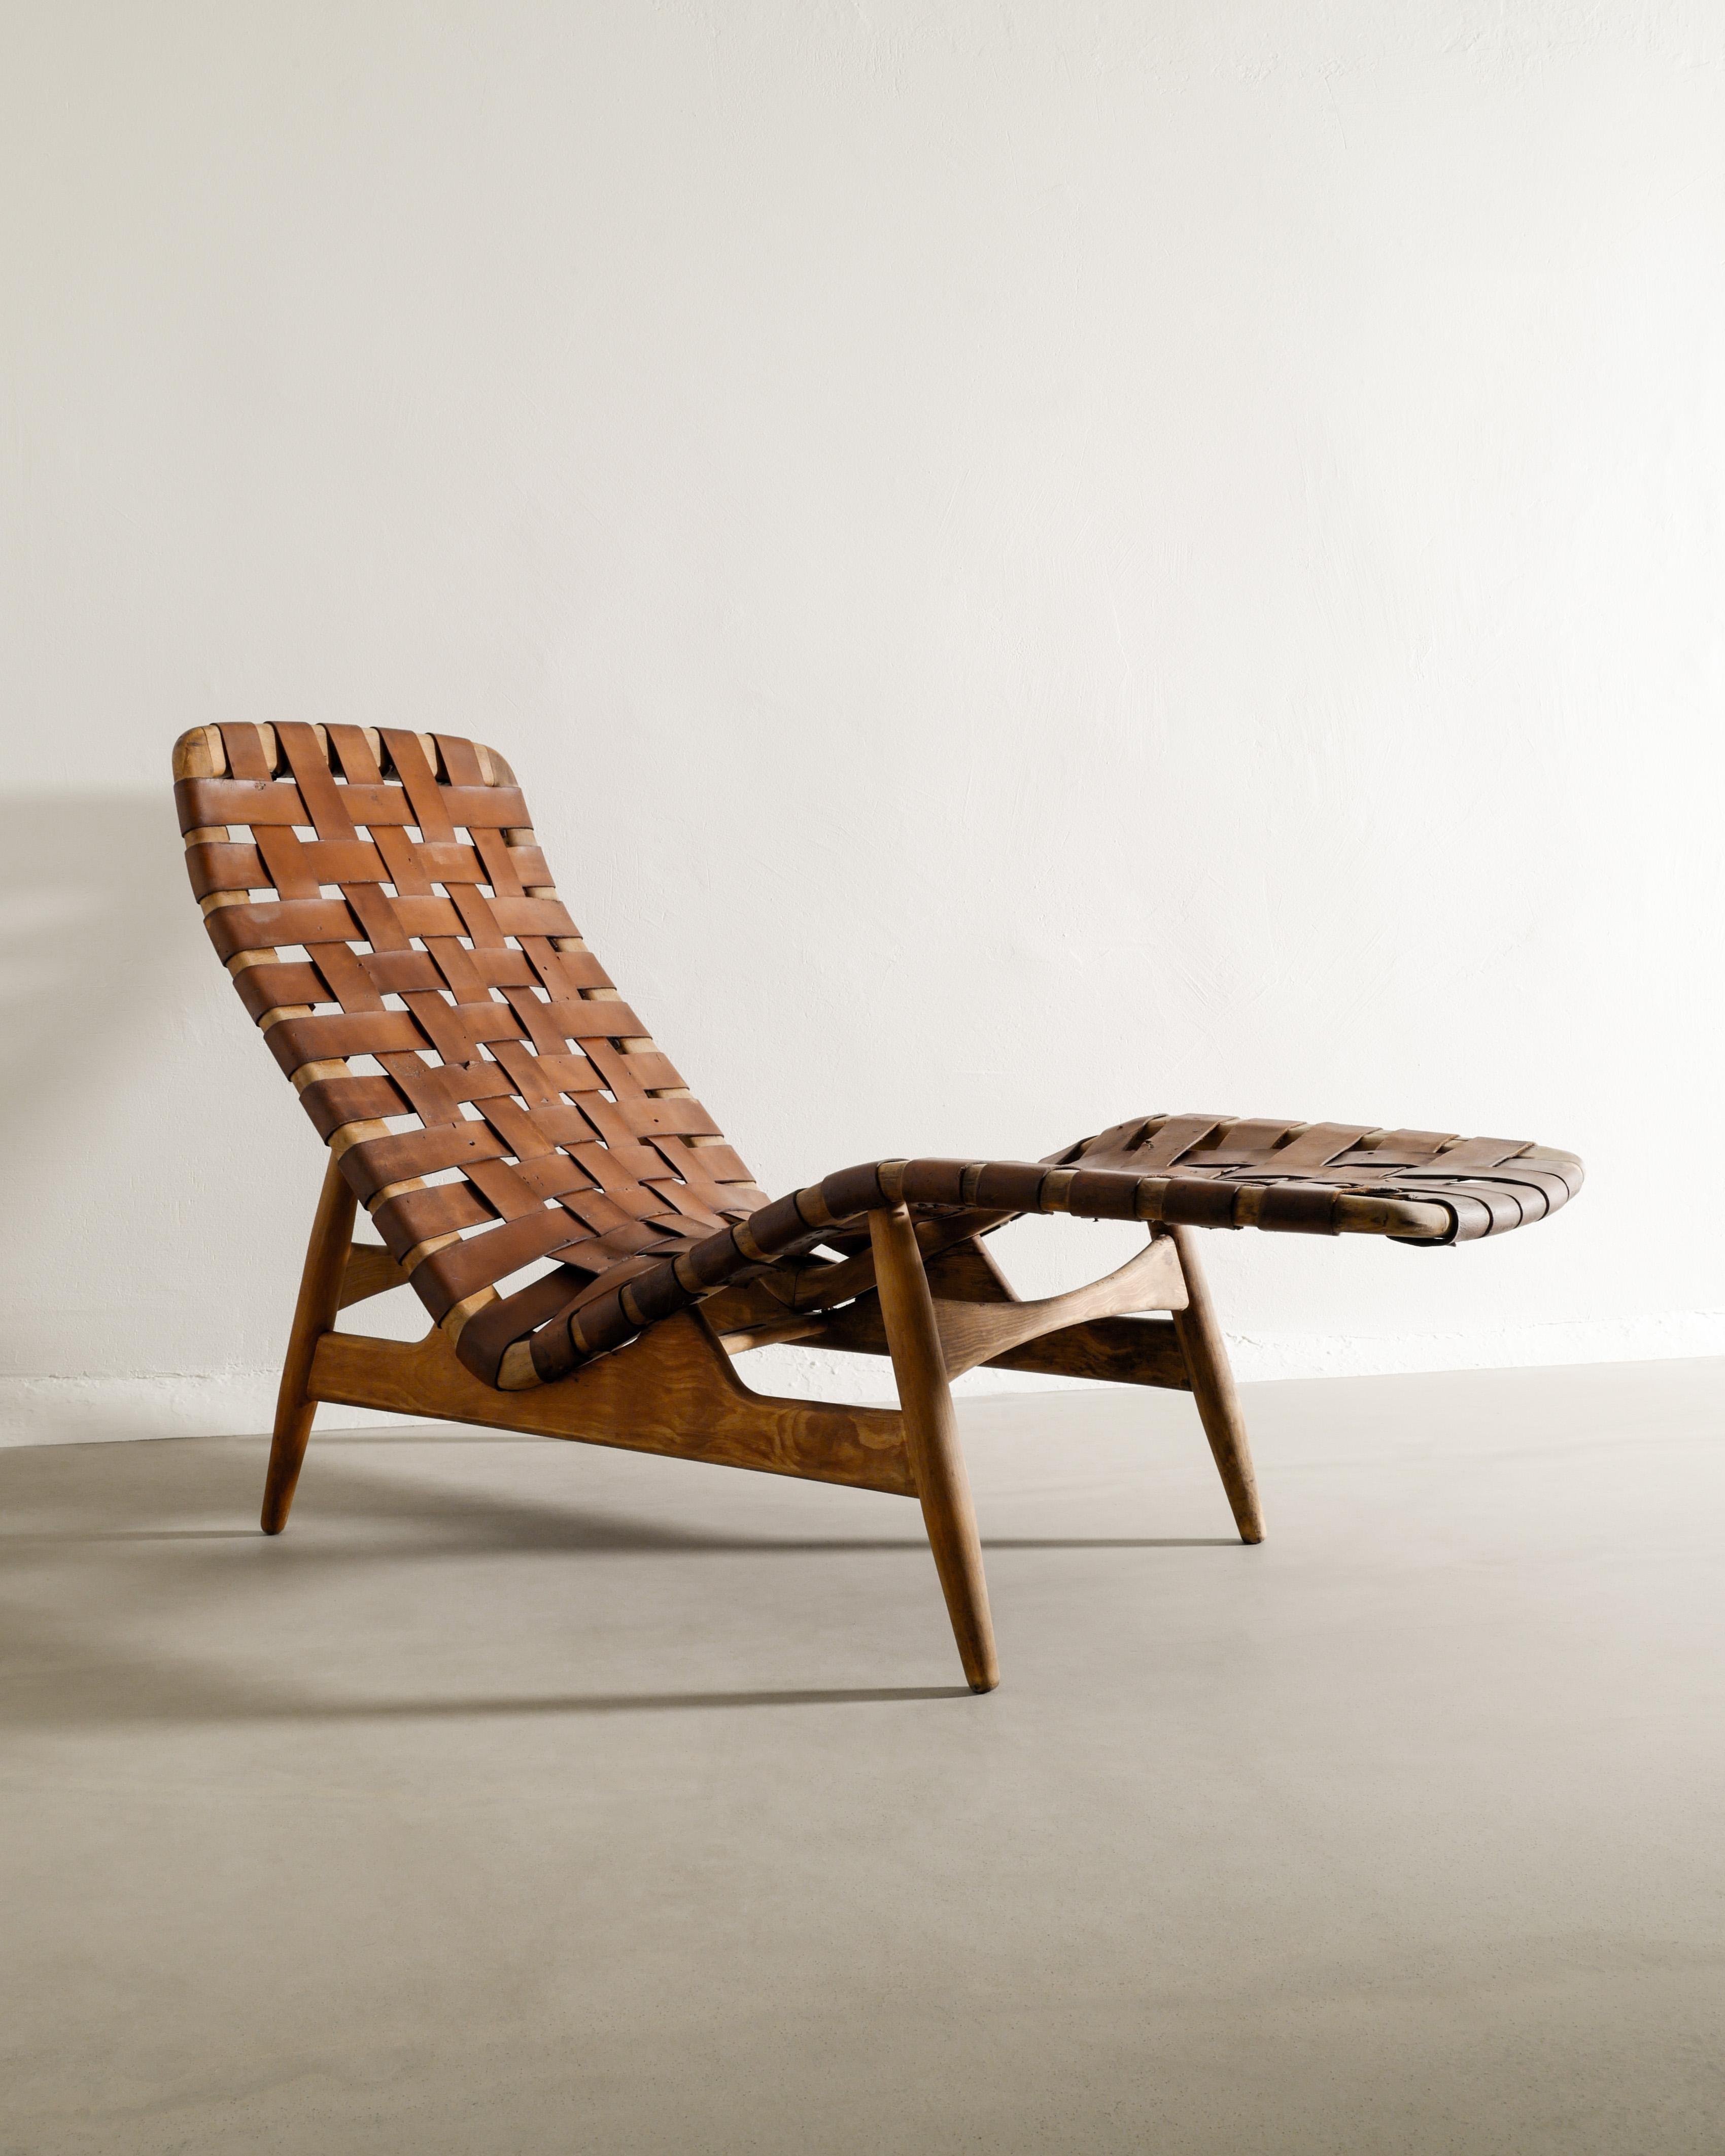 Very rare mid century chaise lounge chair in ash and brown original and patinated leather by Arne Vodder produced by Bovirke, Denmark 1950s. In good original condition. 

Dimensions: H: 94 cm / 37